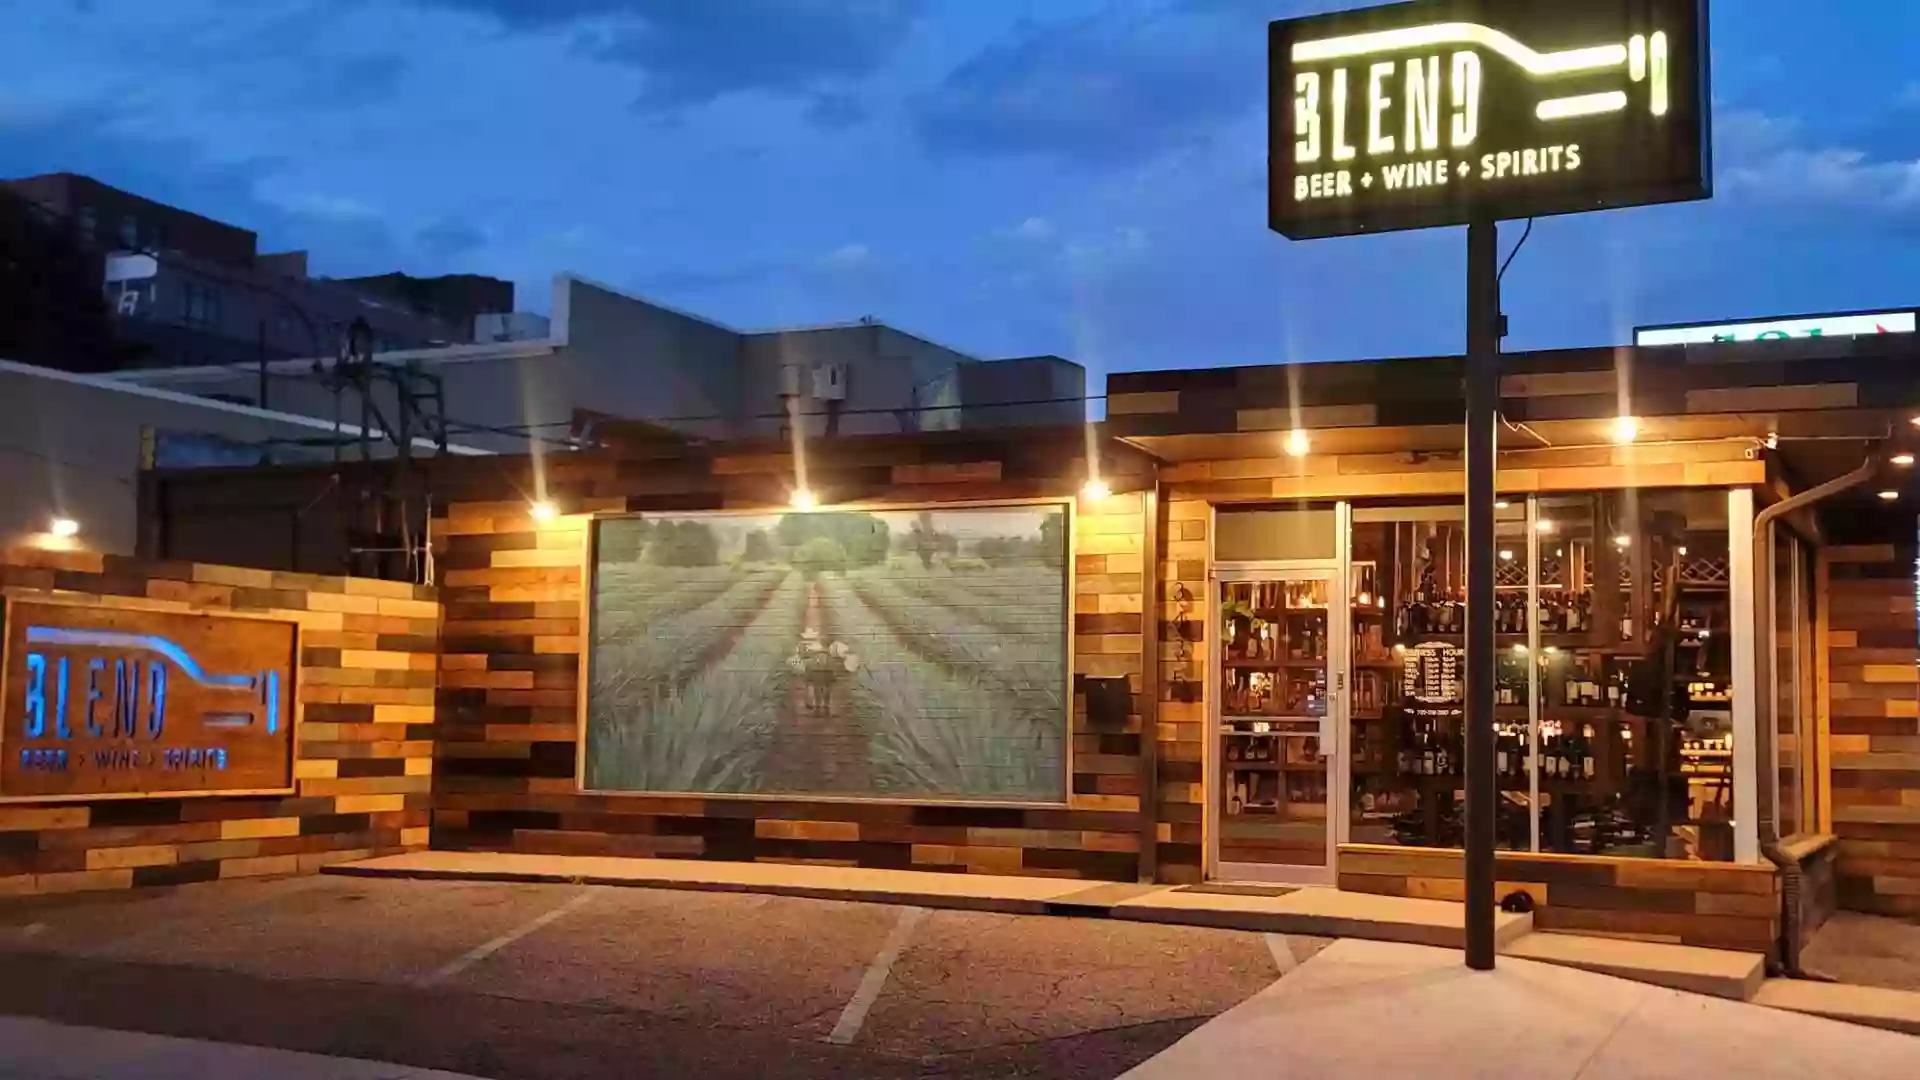 Blend- Beer Wine and Spirits